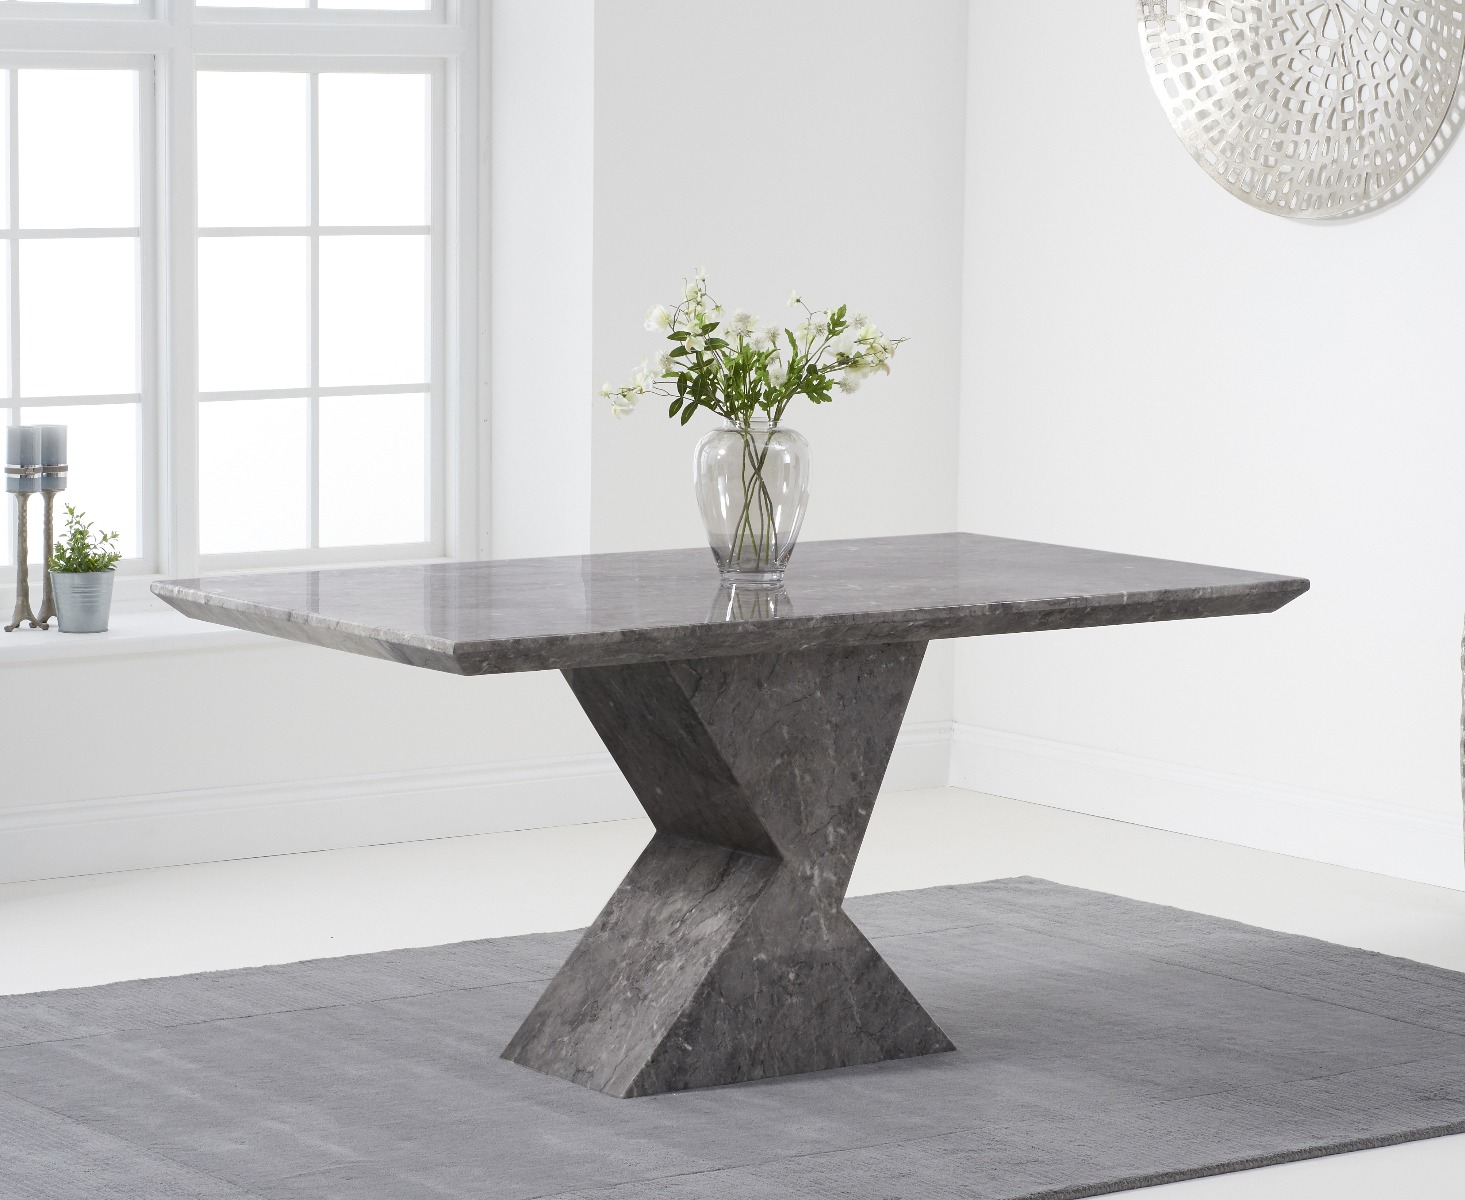 Photo 3 of Aaron 160cm grey marble dining table with 4 grey aldo chairs